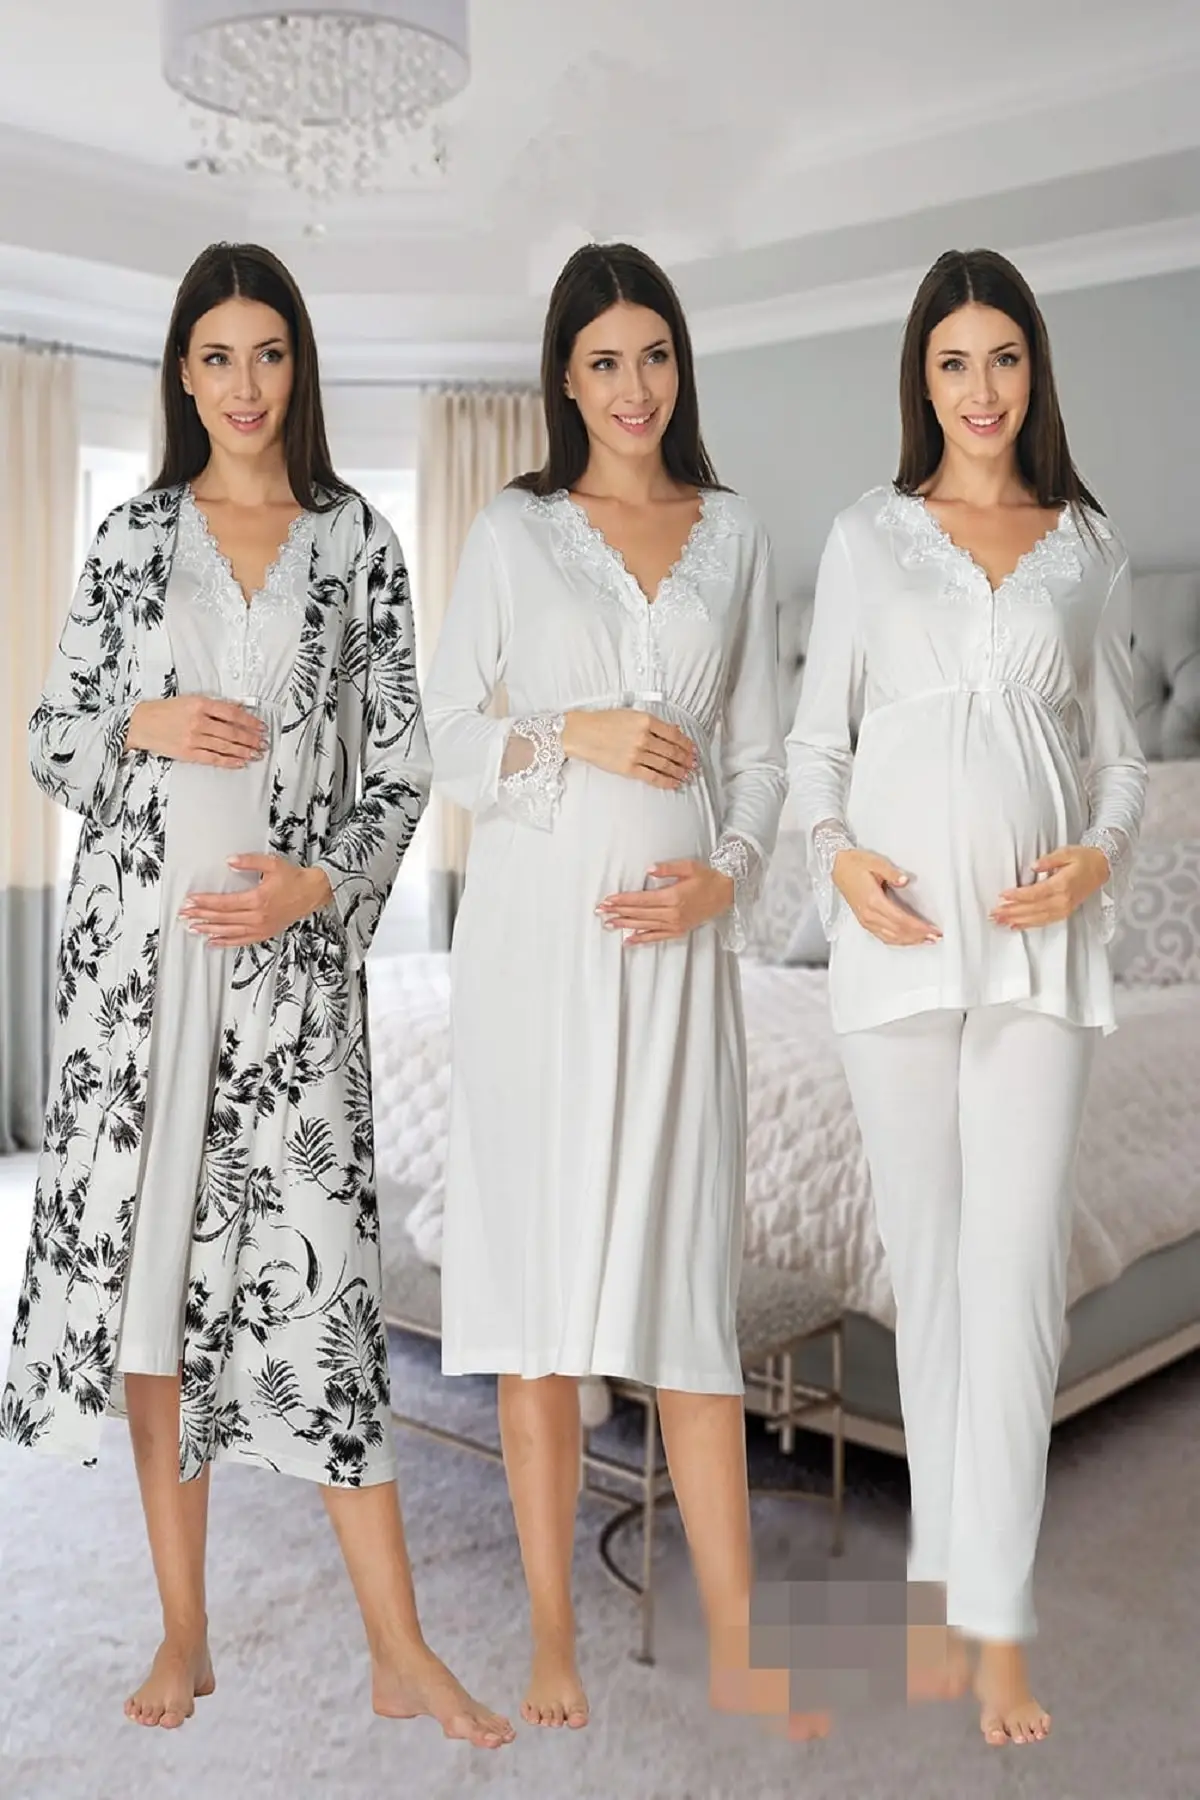 Women's White Long-Sleeve Pajamas Set Nightgown Dressing Gown Puerperal Maternity 4'lü Set enlarge